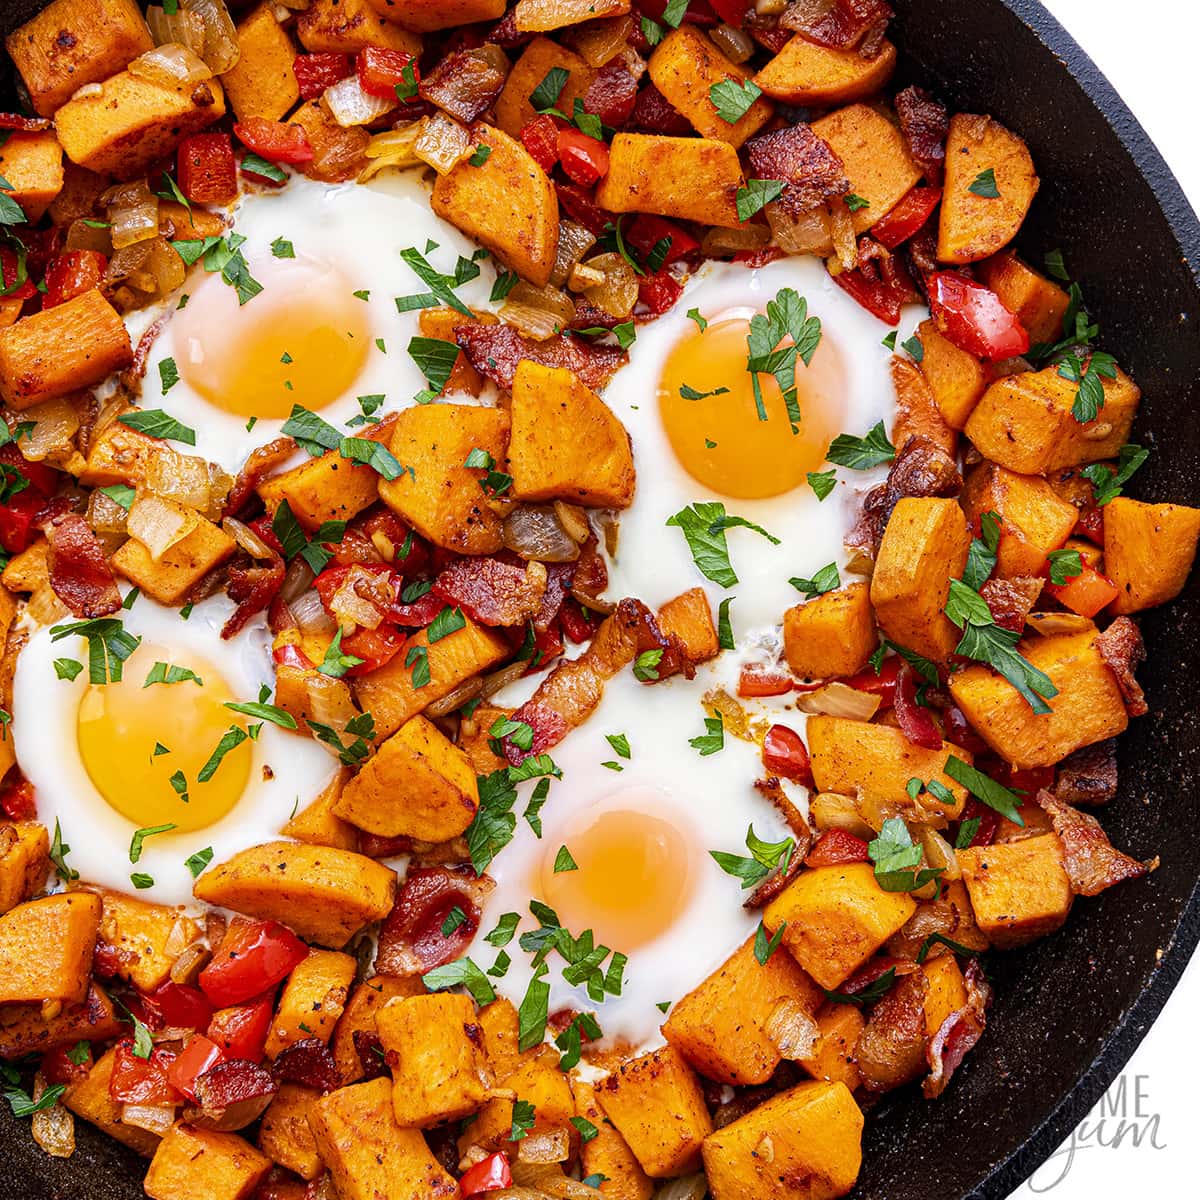 Finished sweet potato breakfast hash with eggs.